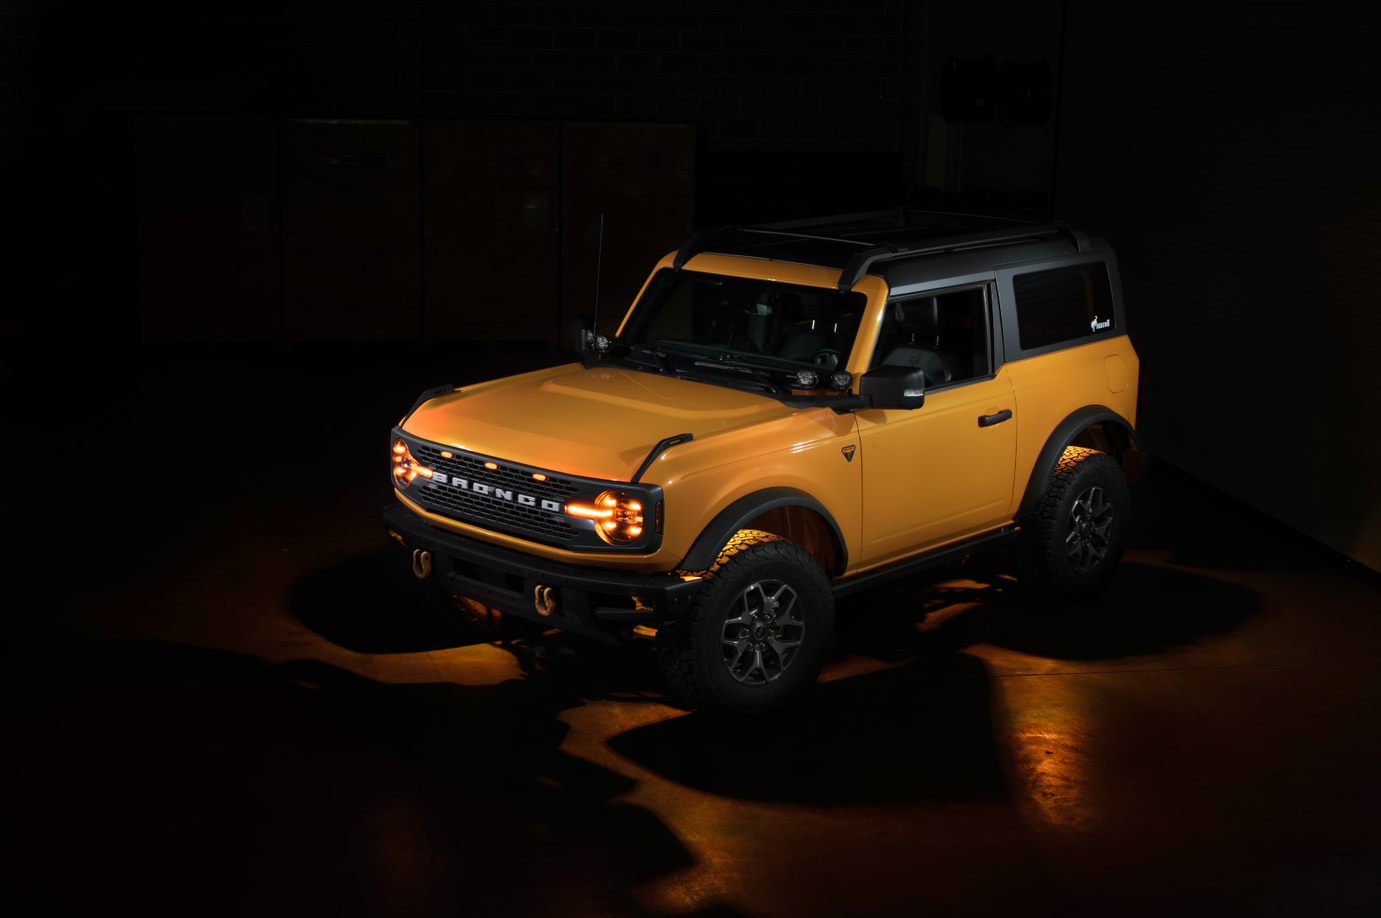 2020-ford-bronco-is-shown-in-a-dark-room